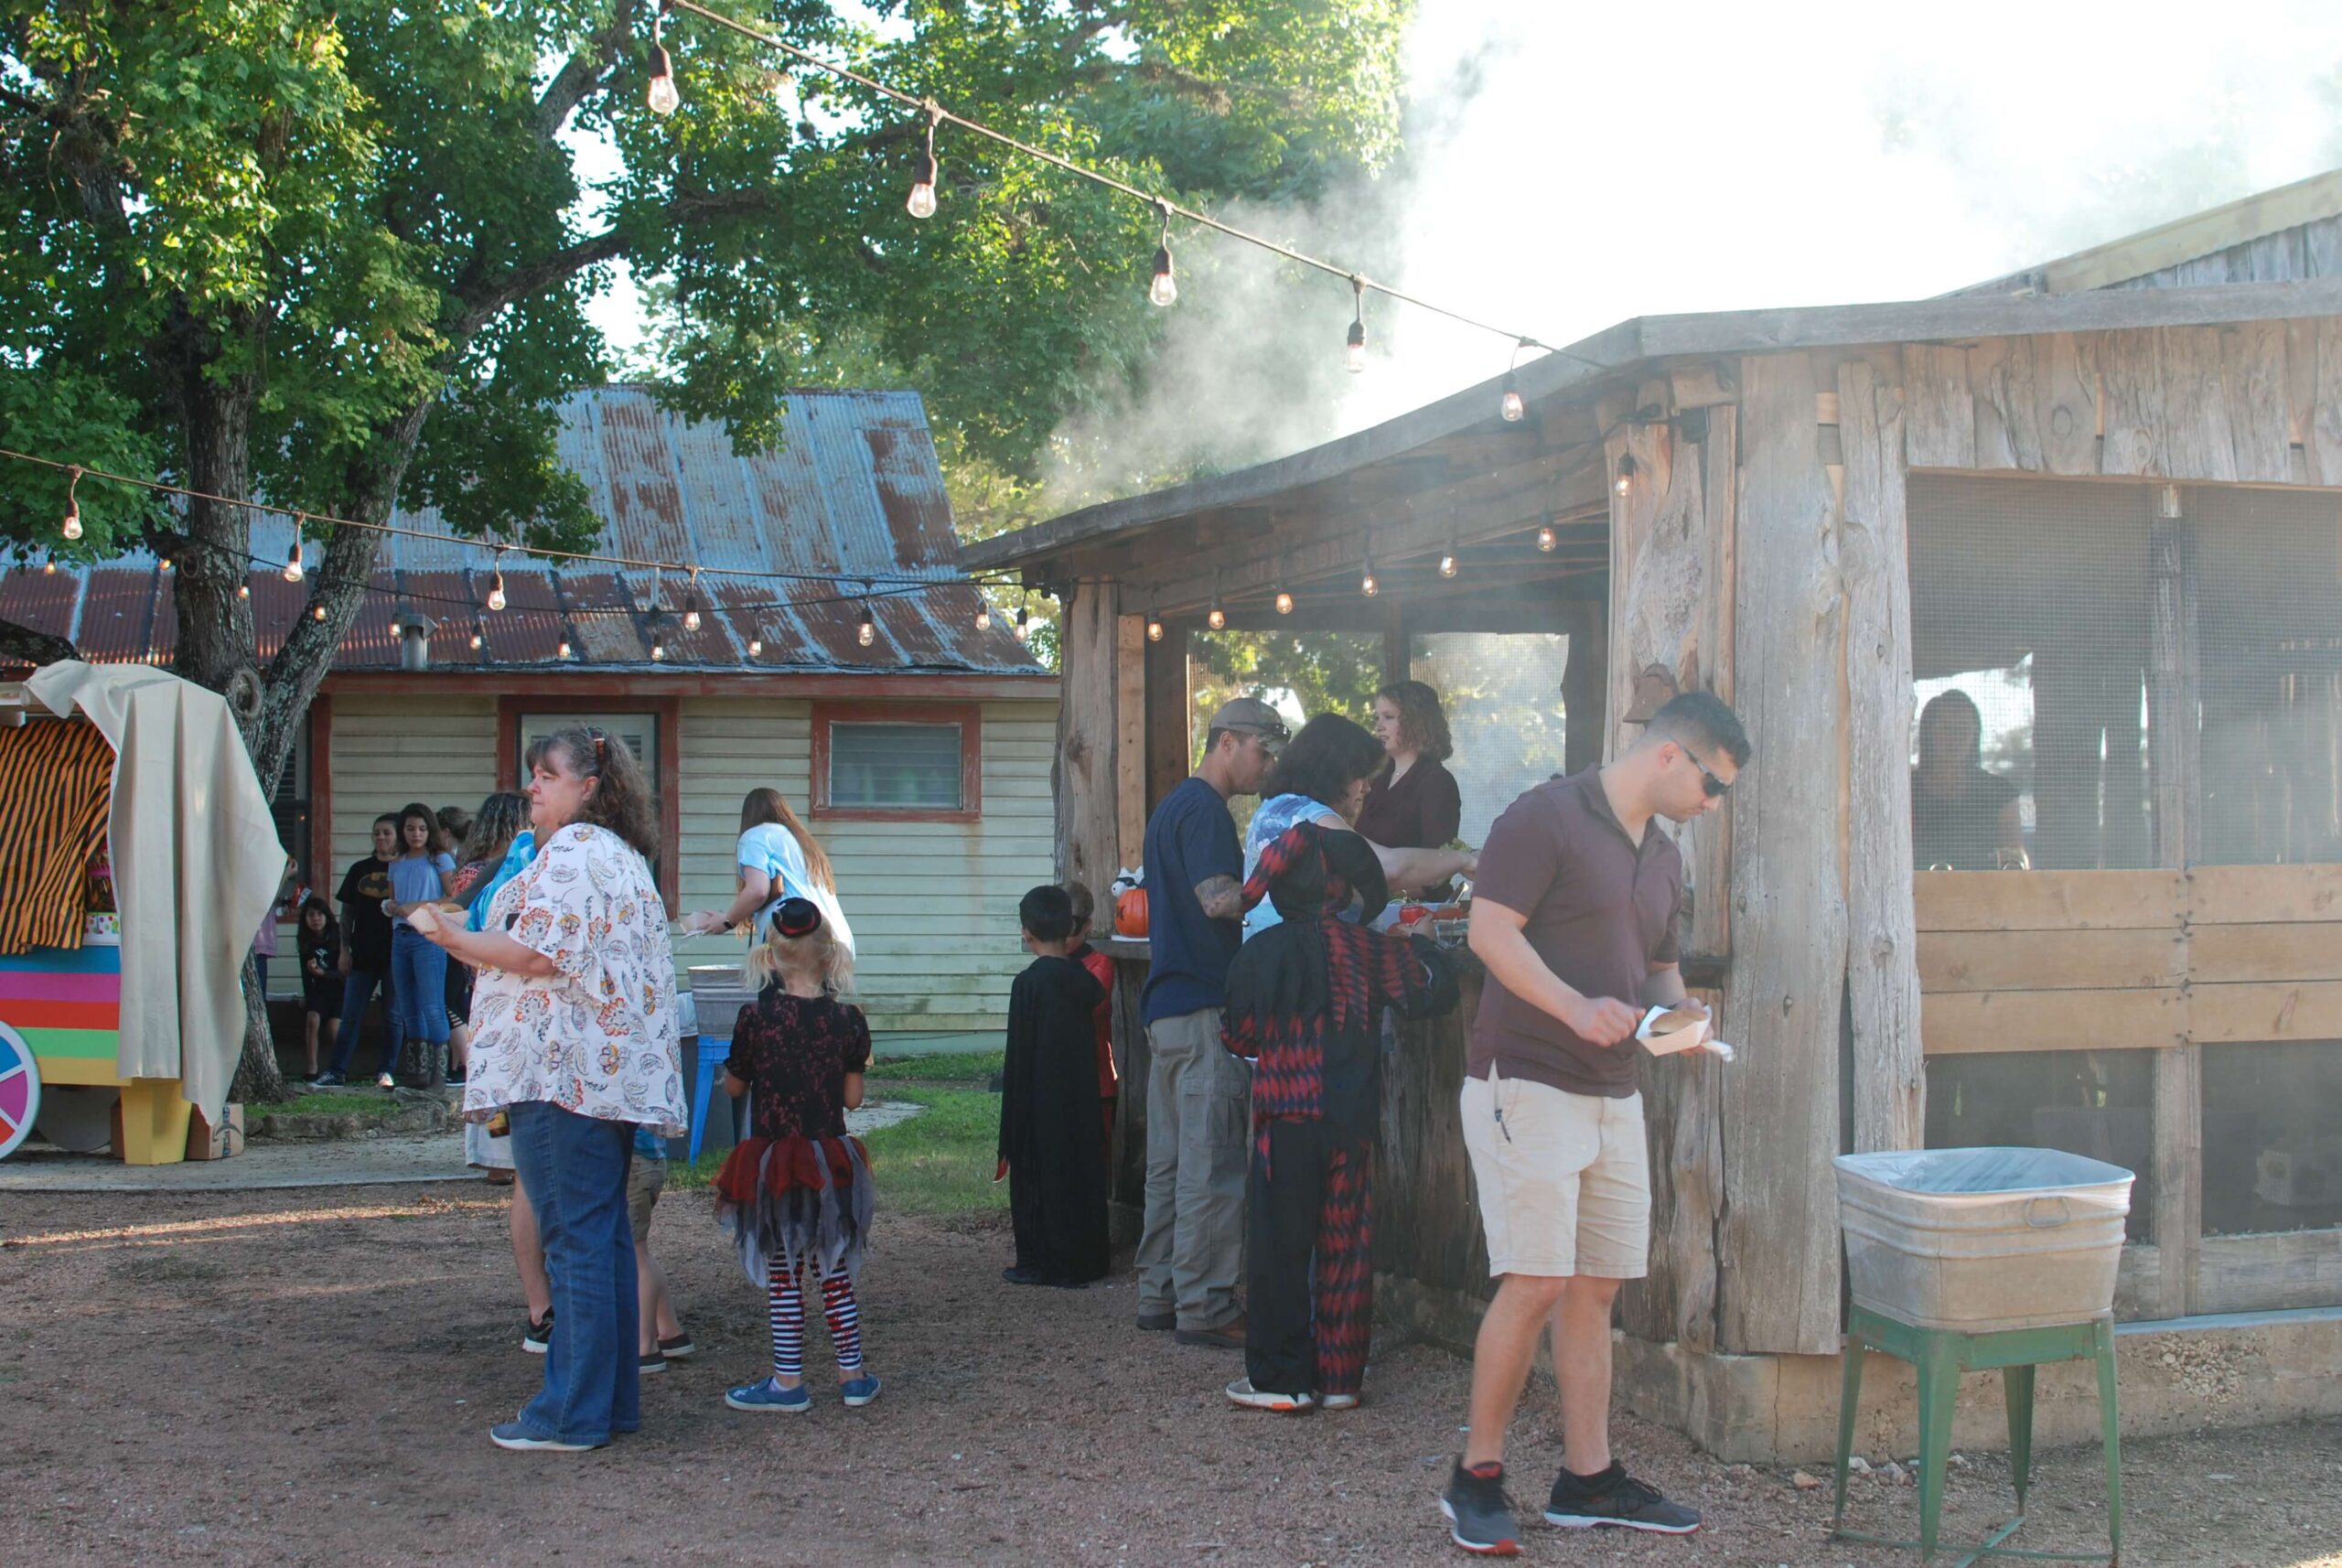 BBQ buffet line for a company picnic at Enchanted Springs Ranch